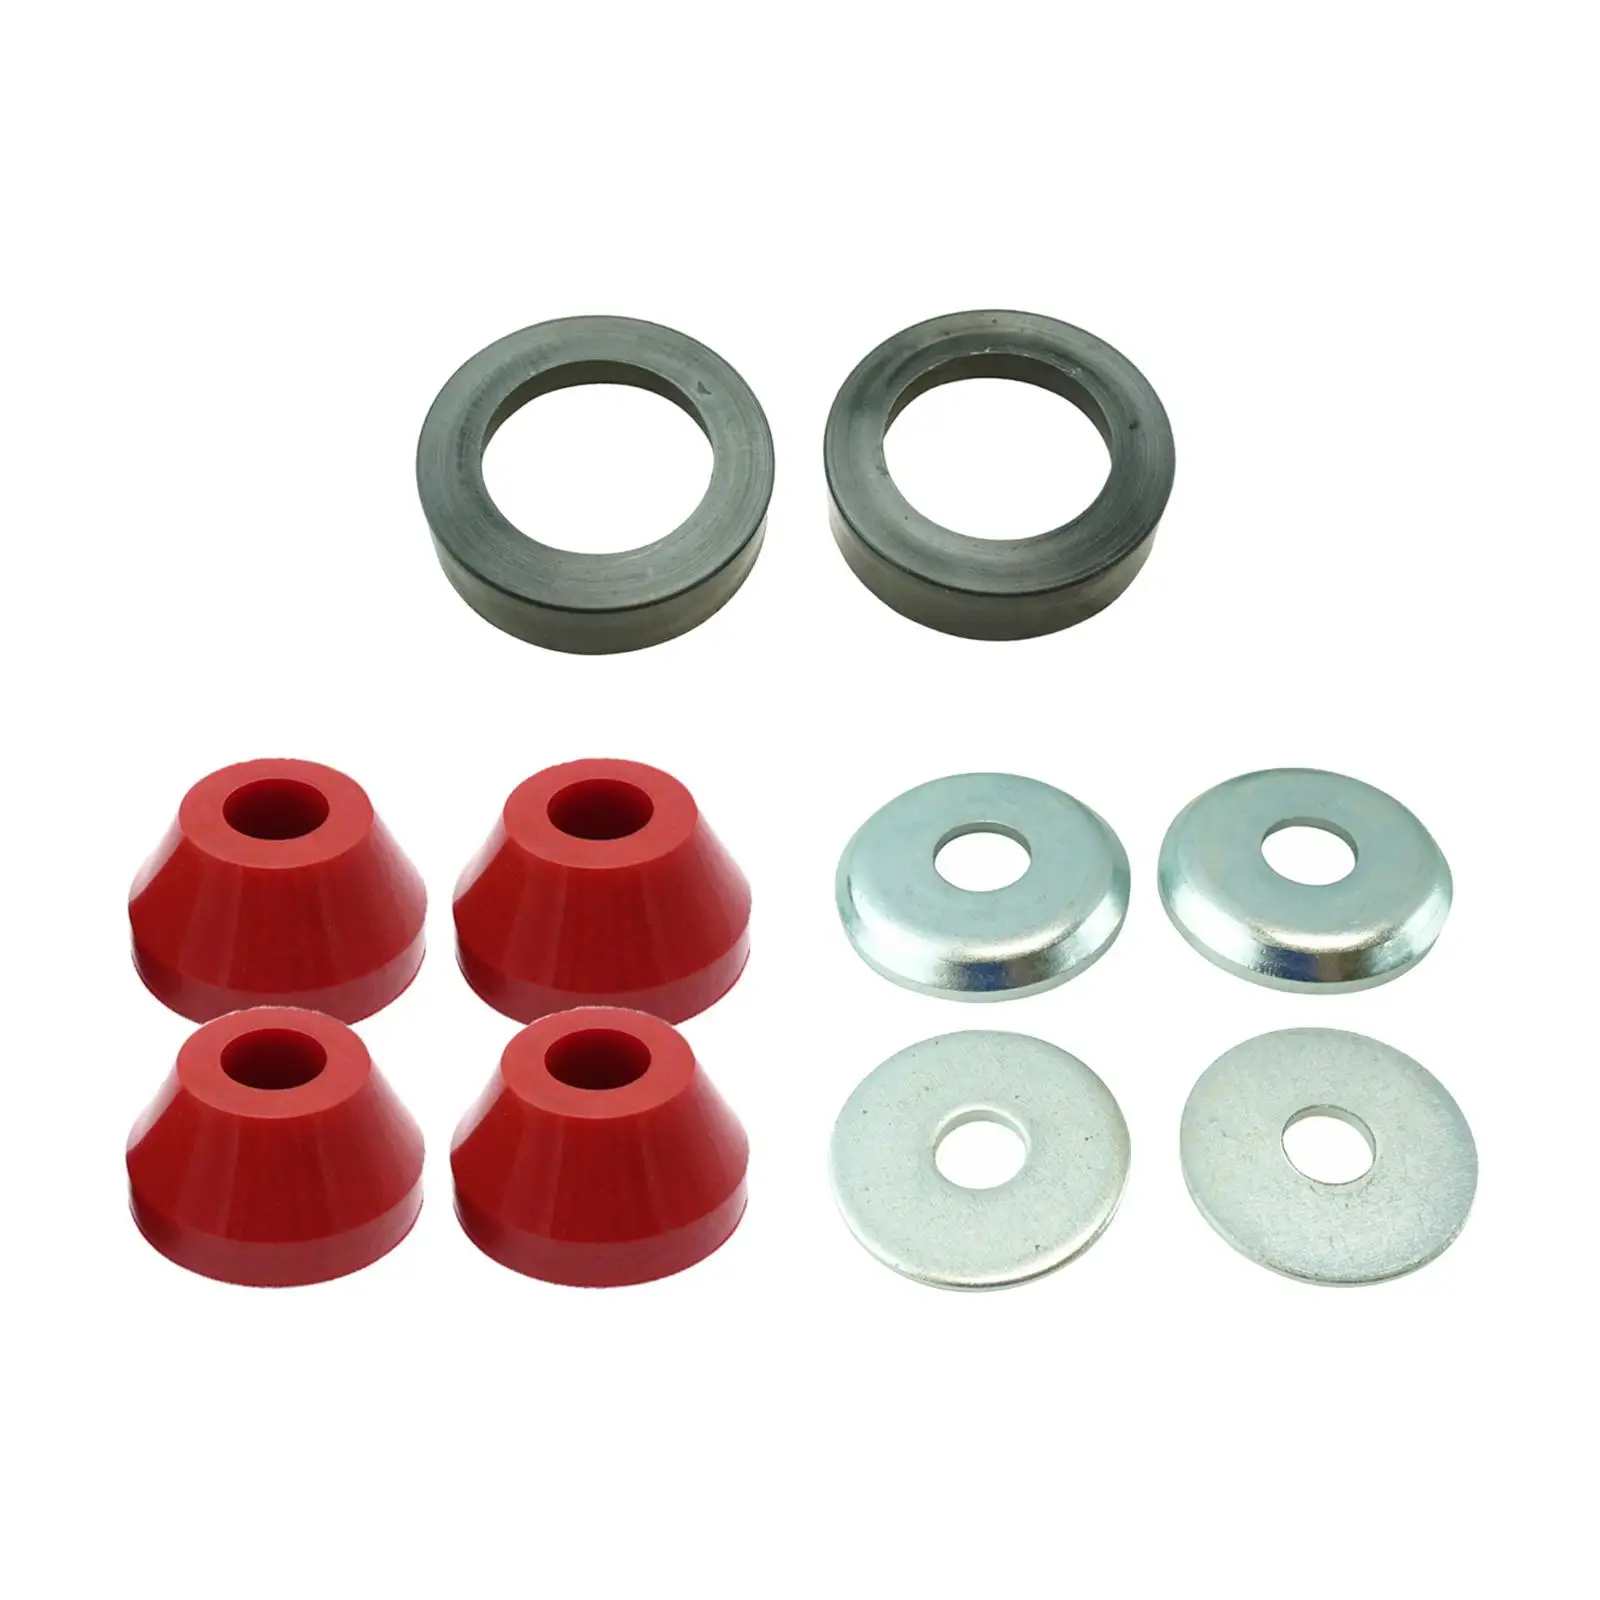 Radius Arm Bushing Replacement Parts for Ford Bronco Ranger F150 F250